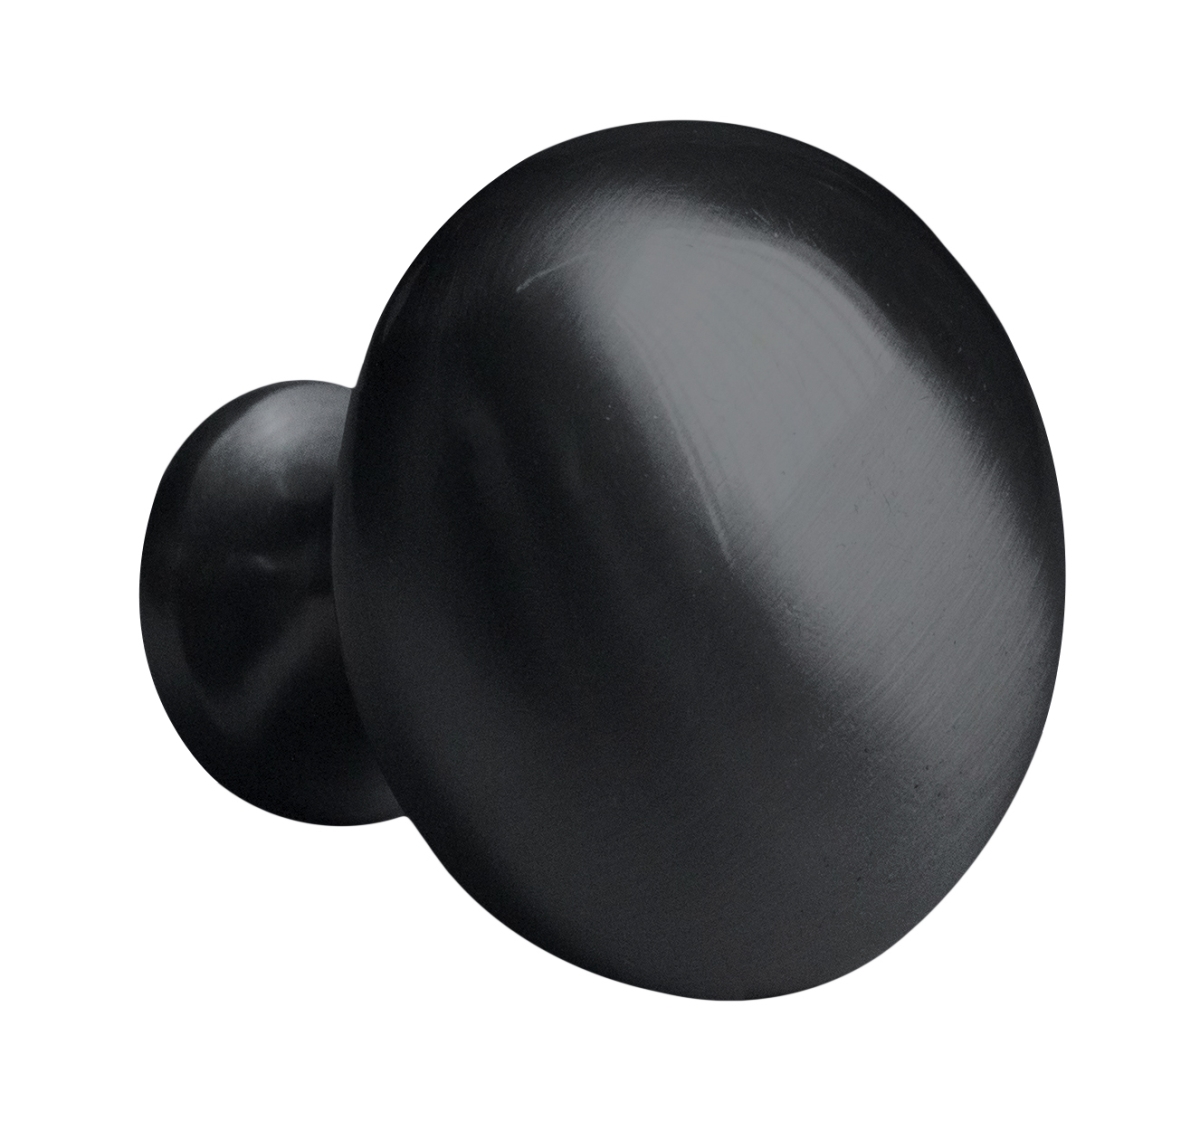 Ai-21409 1.25 In. Round Stainless Steel Cabinet Knob, Black